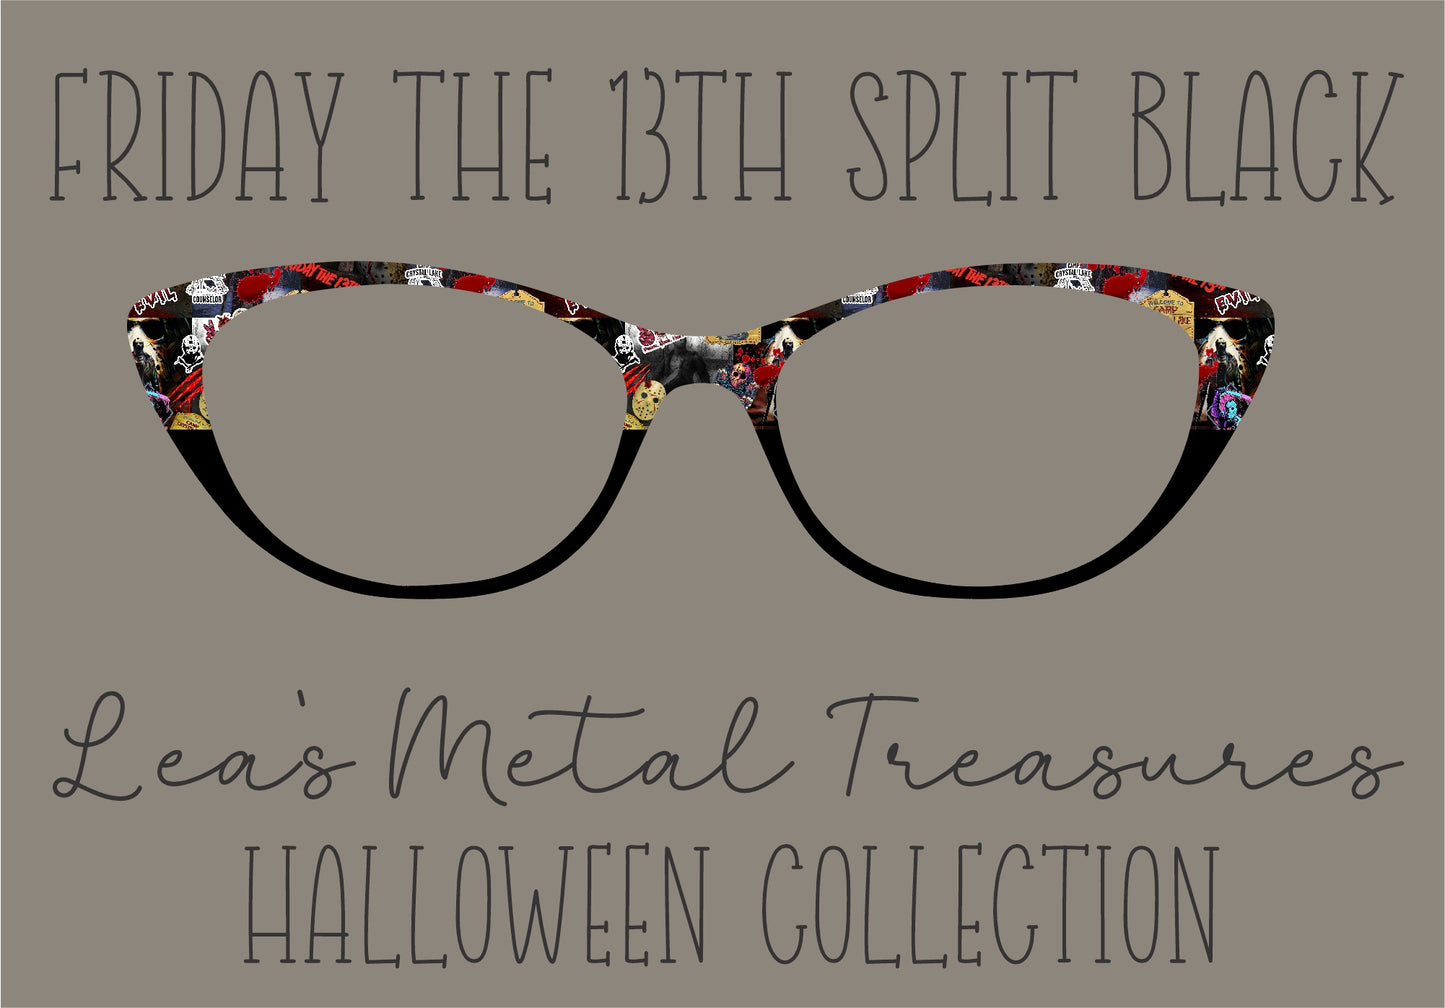 FRIDAY THE 13TH SPLIT BLACK Eyewear Frame Toppers COMES WITH MAGNETS